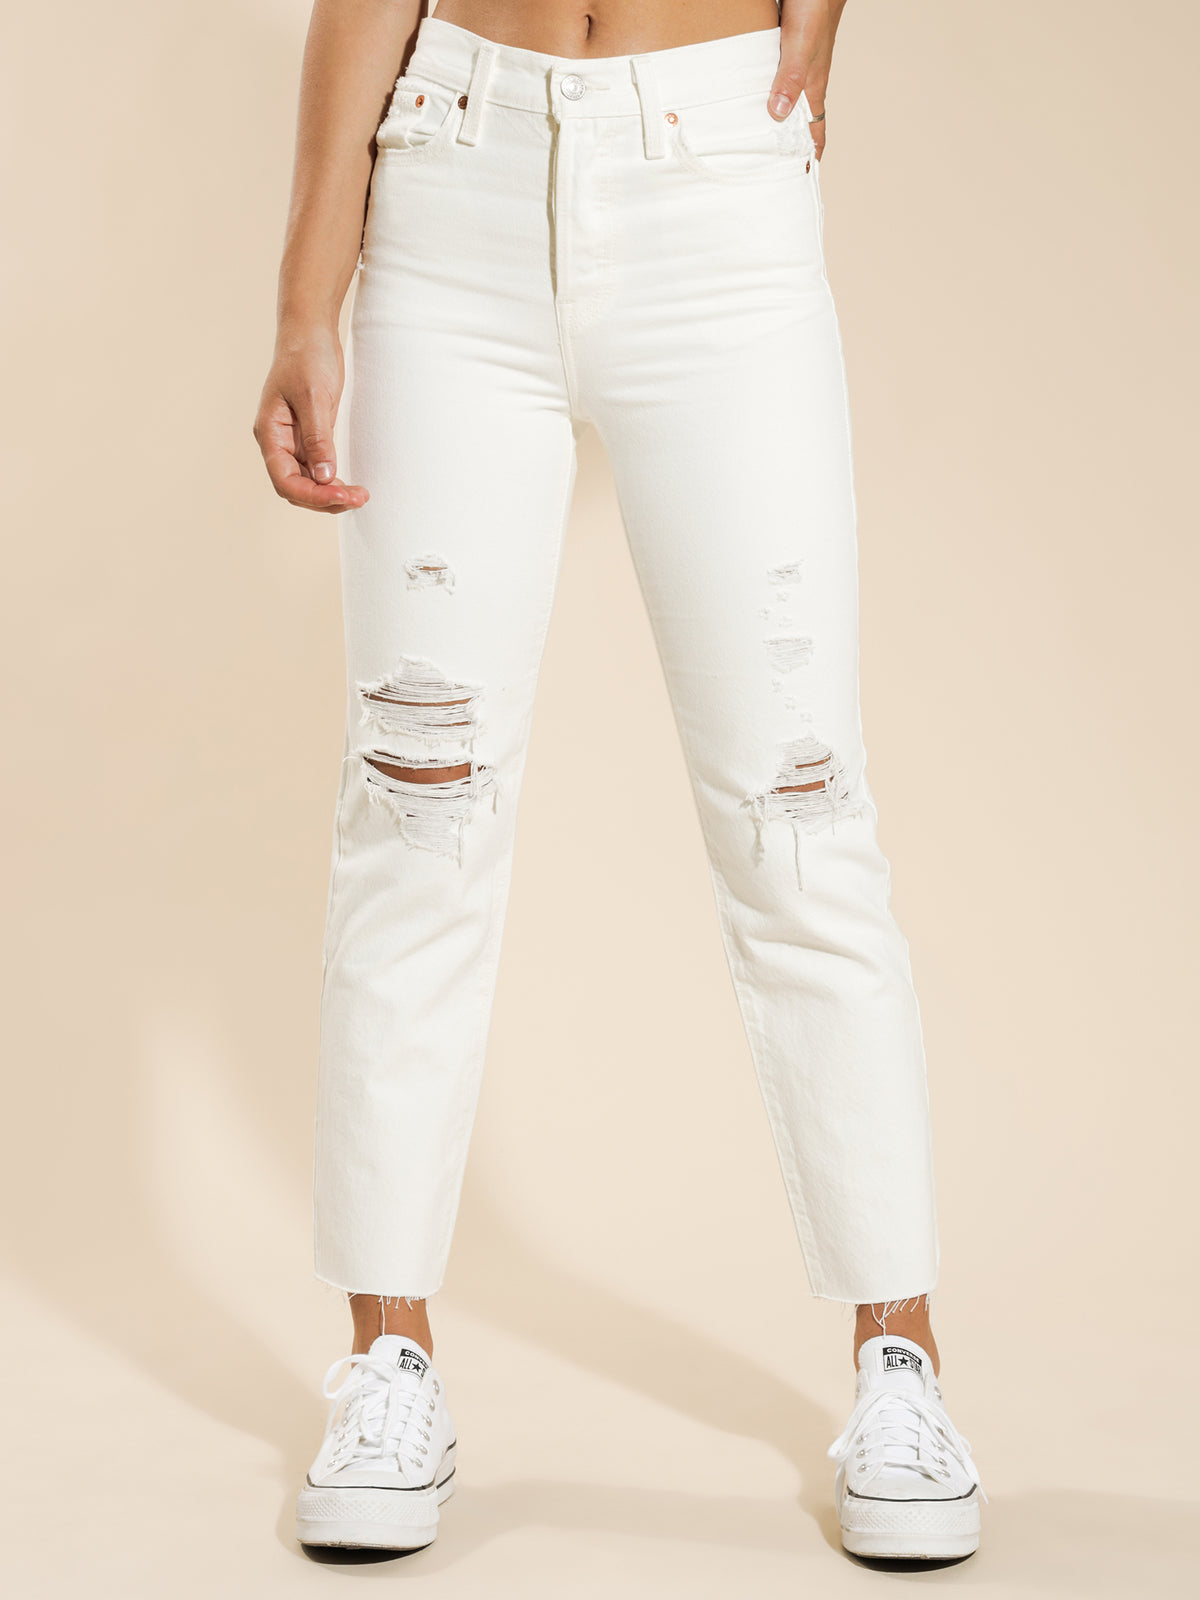 Wedgie Fit Straight Jeans in Cloud Bank